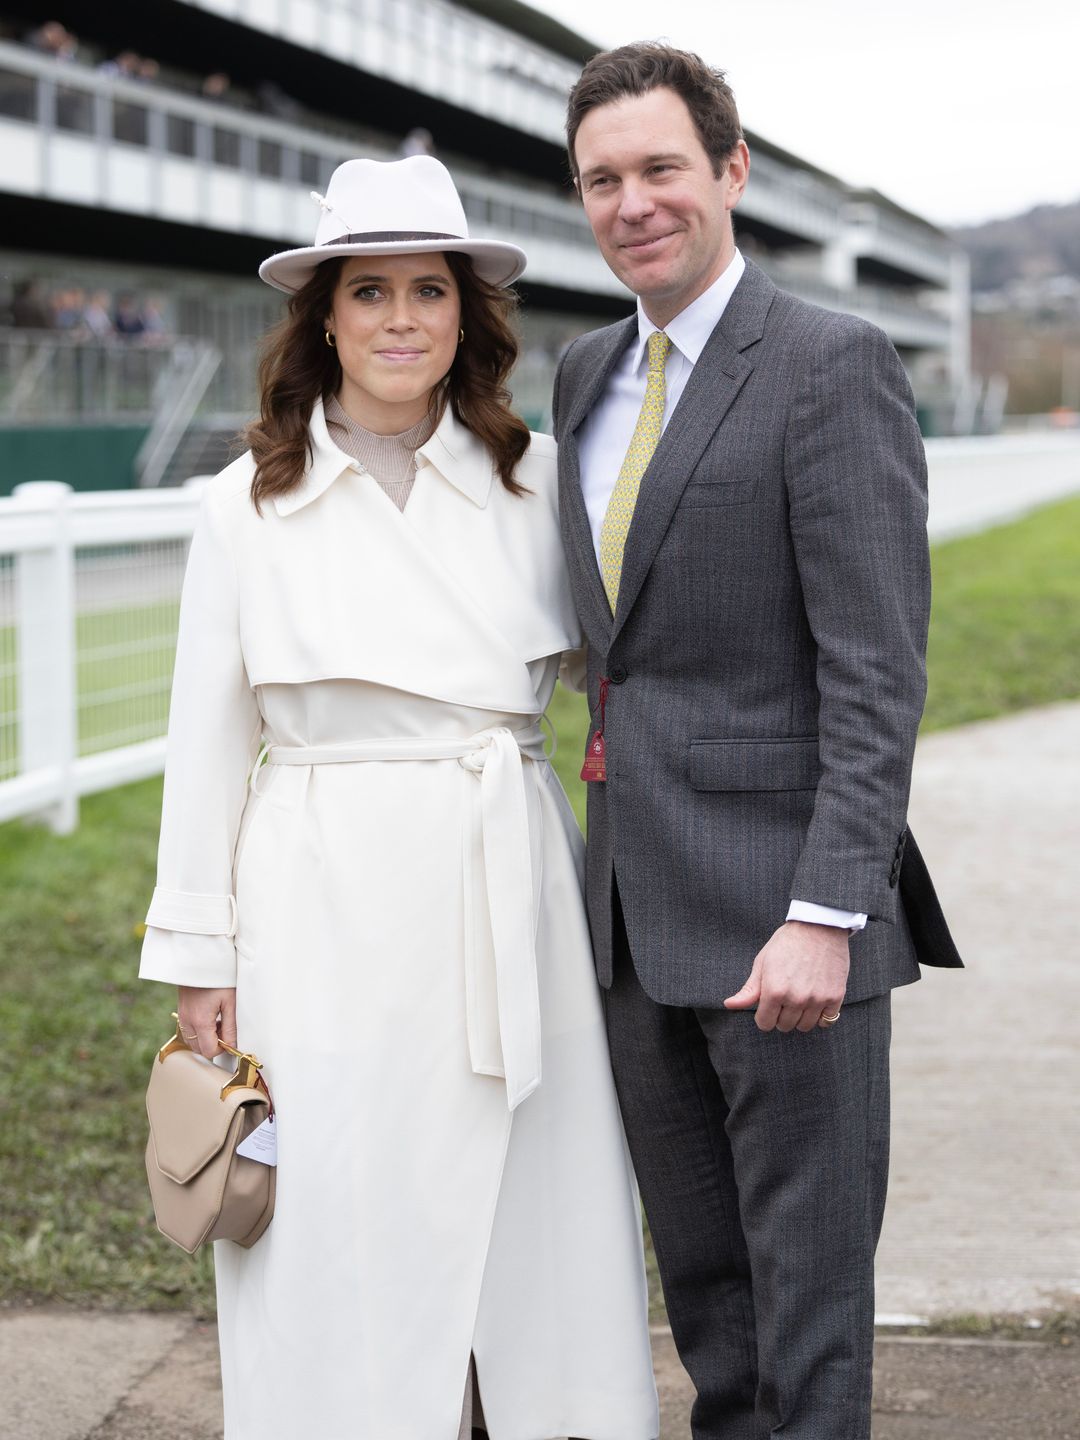 The royal looked radiant in a Reiss coat